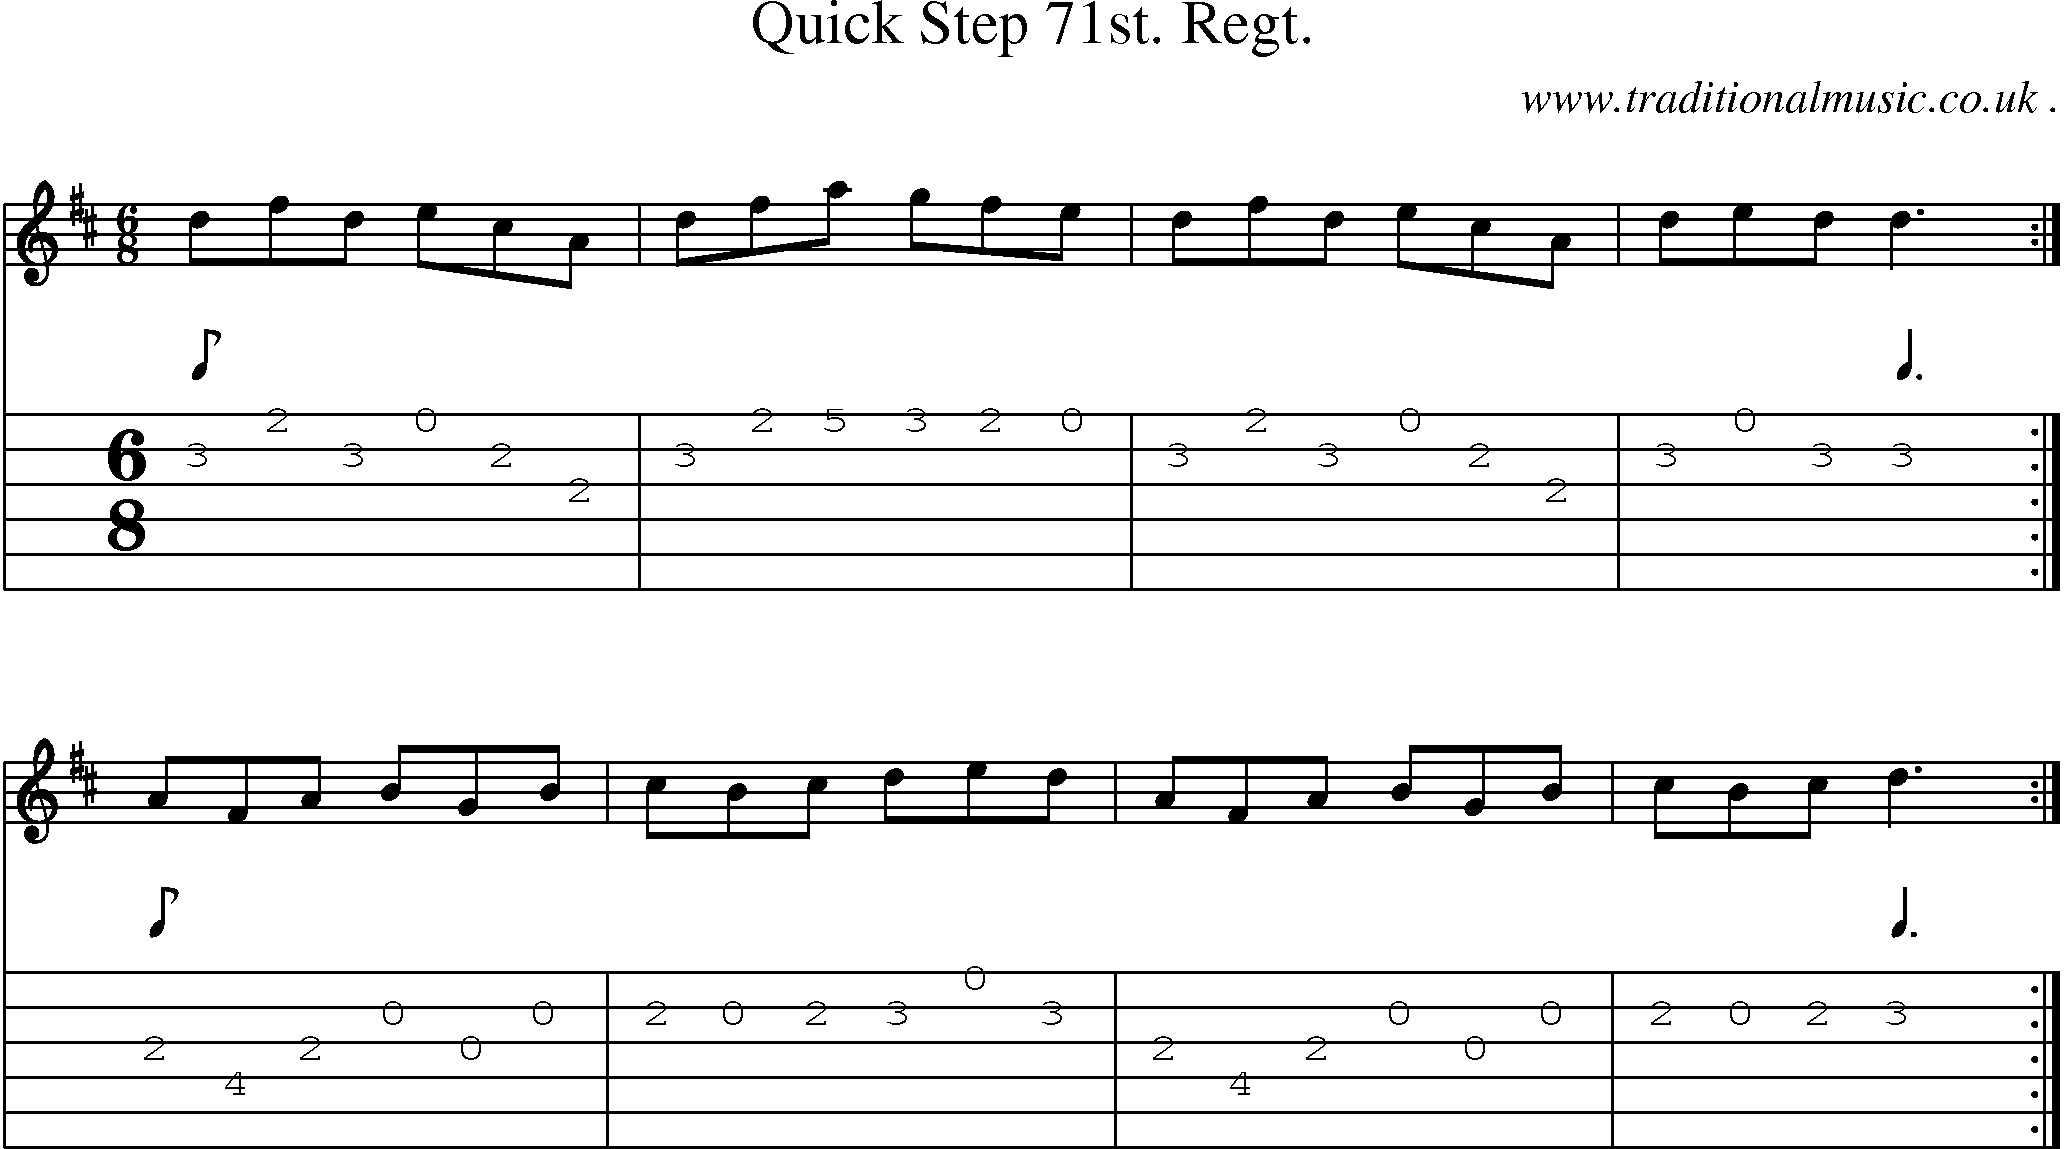 Sheet-music  score, Chords and Guitar Tabs for Quick Step 71st Regt